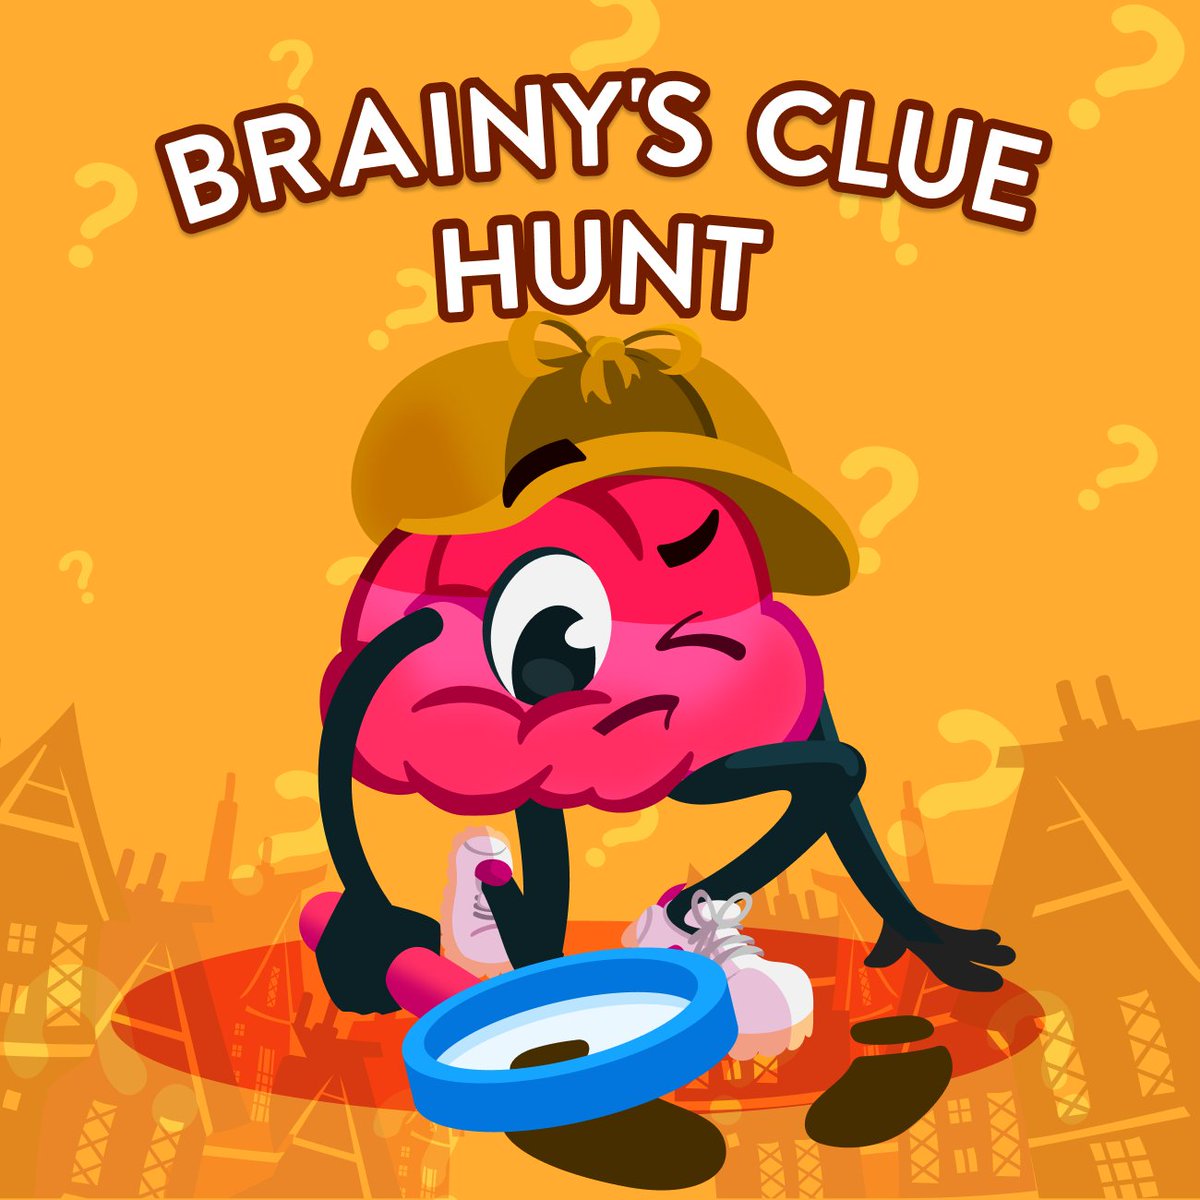 Intriguing events are unfolding in WordBrain! 👀 Brace yourself for the revival of Brainy's Clue Hunt! 🔎

Will you step up to assist Brainy in gathering all the clues needed to unravel this puzzling mystery? 🤔 
Join the adventure! 🧩